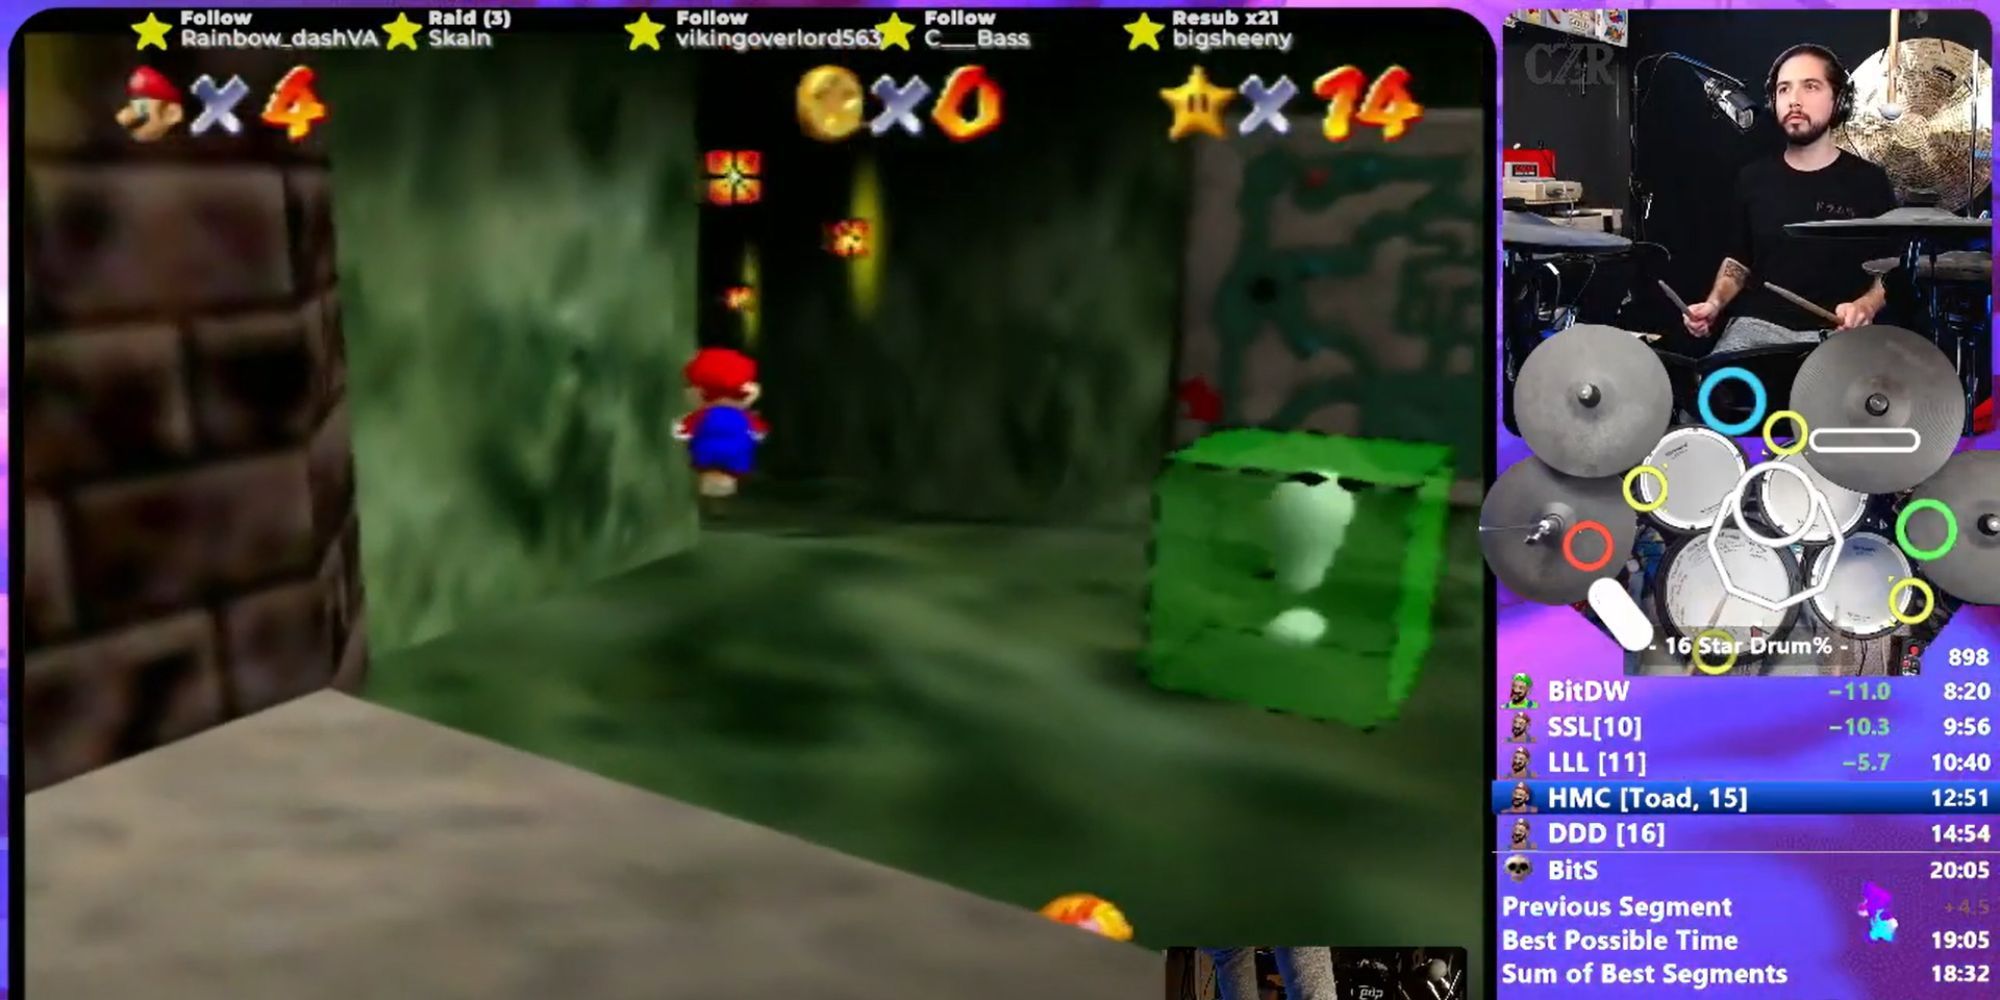 A streamer completes Super Mario 64 in just 20 minutes using a drum set!  - Meristation